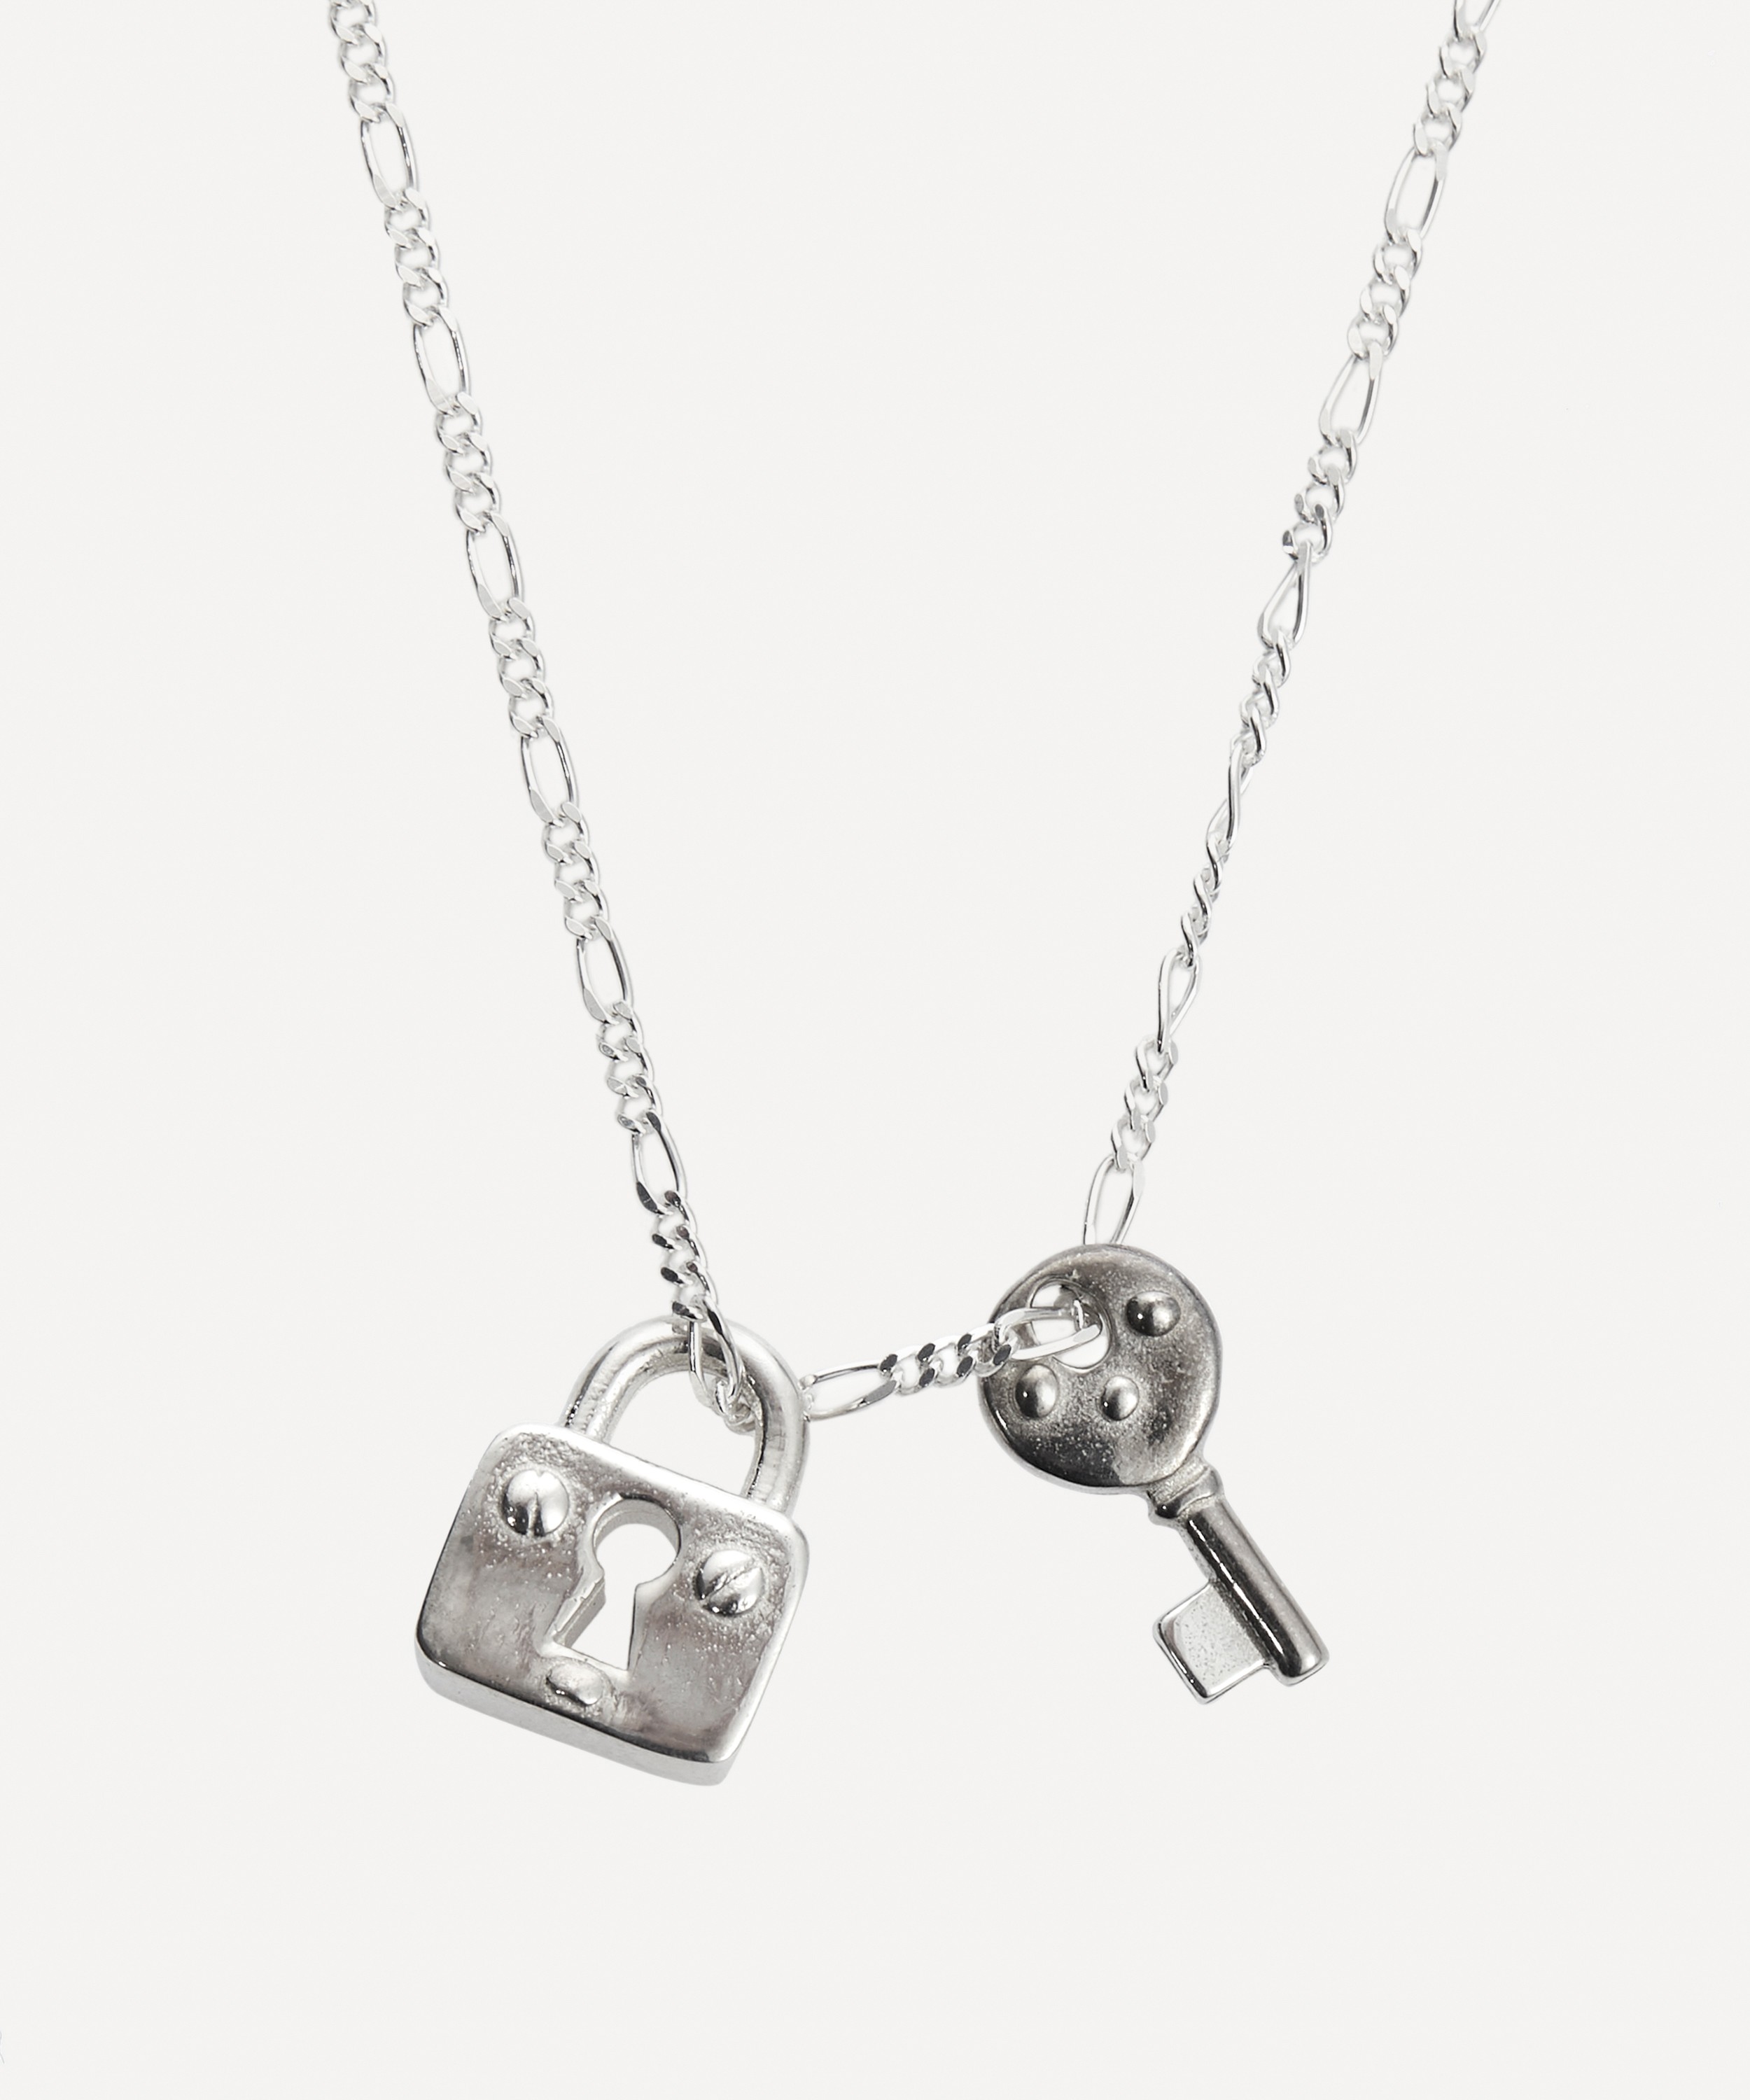 Padlock and Key Necklace - Sterling Silver